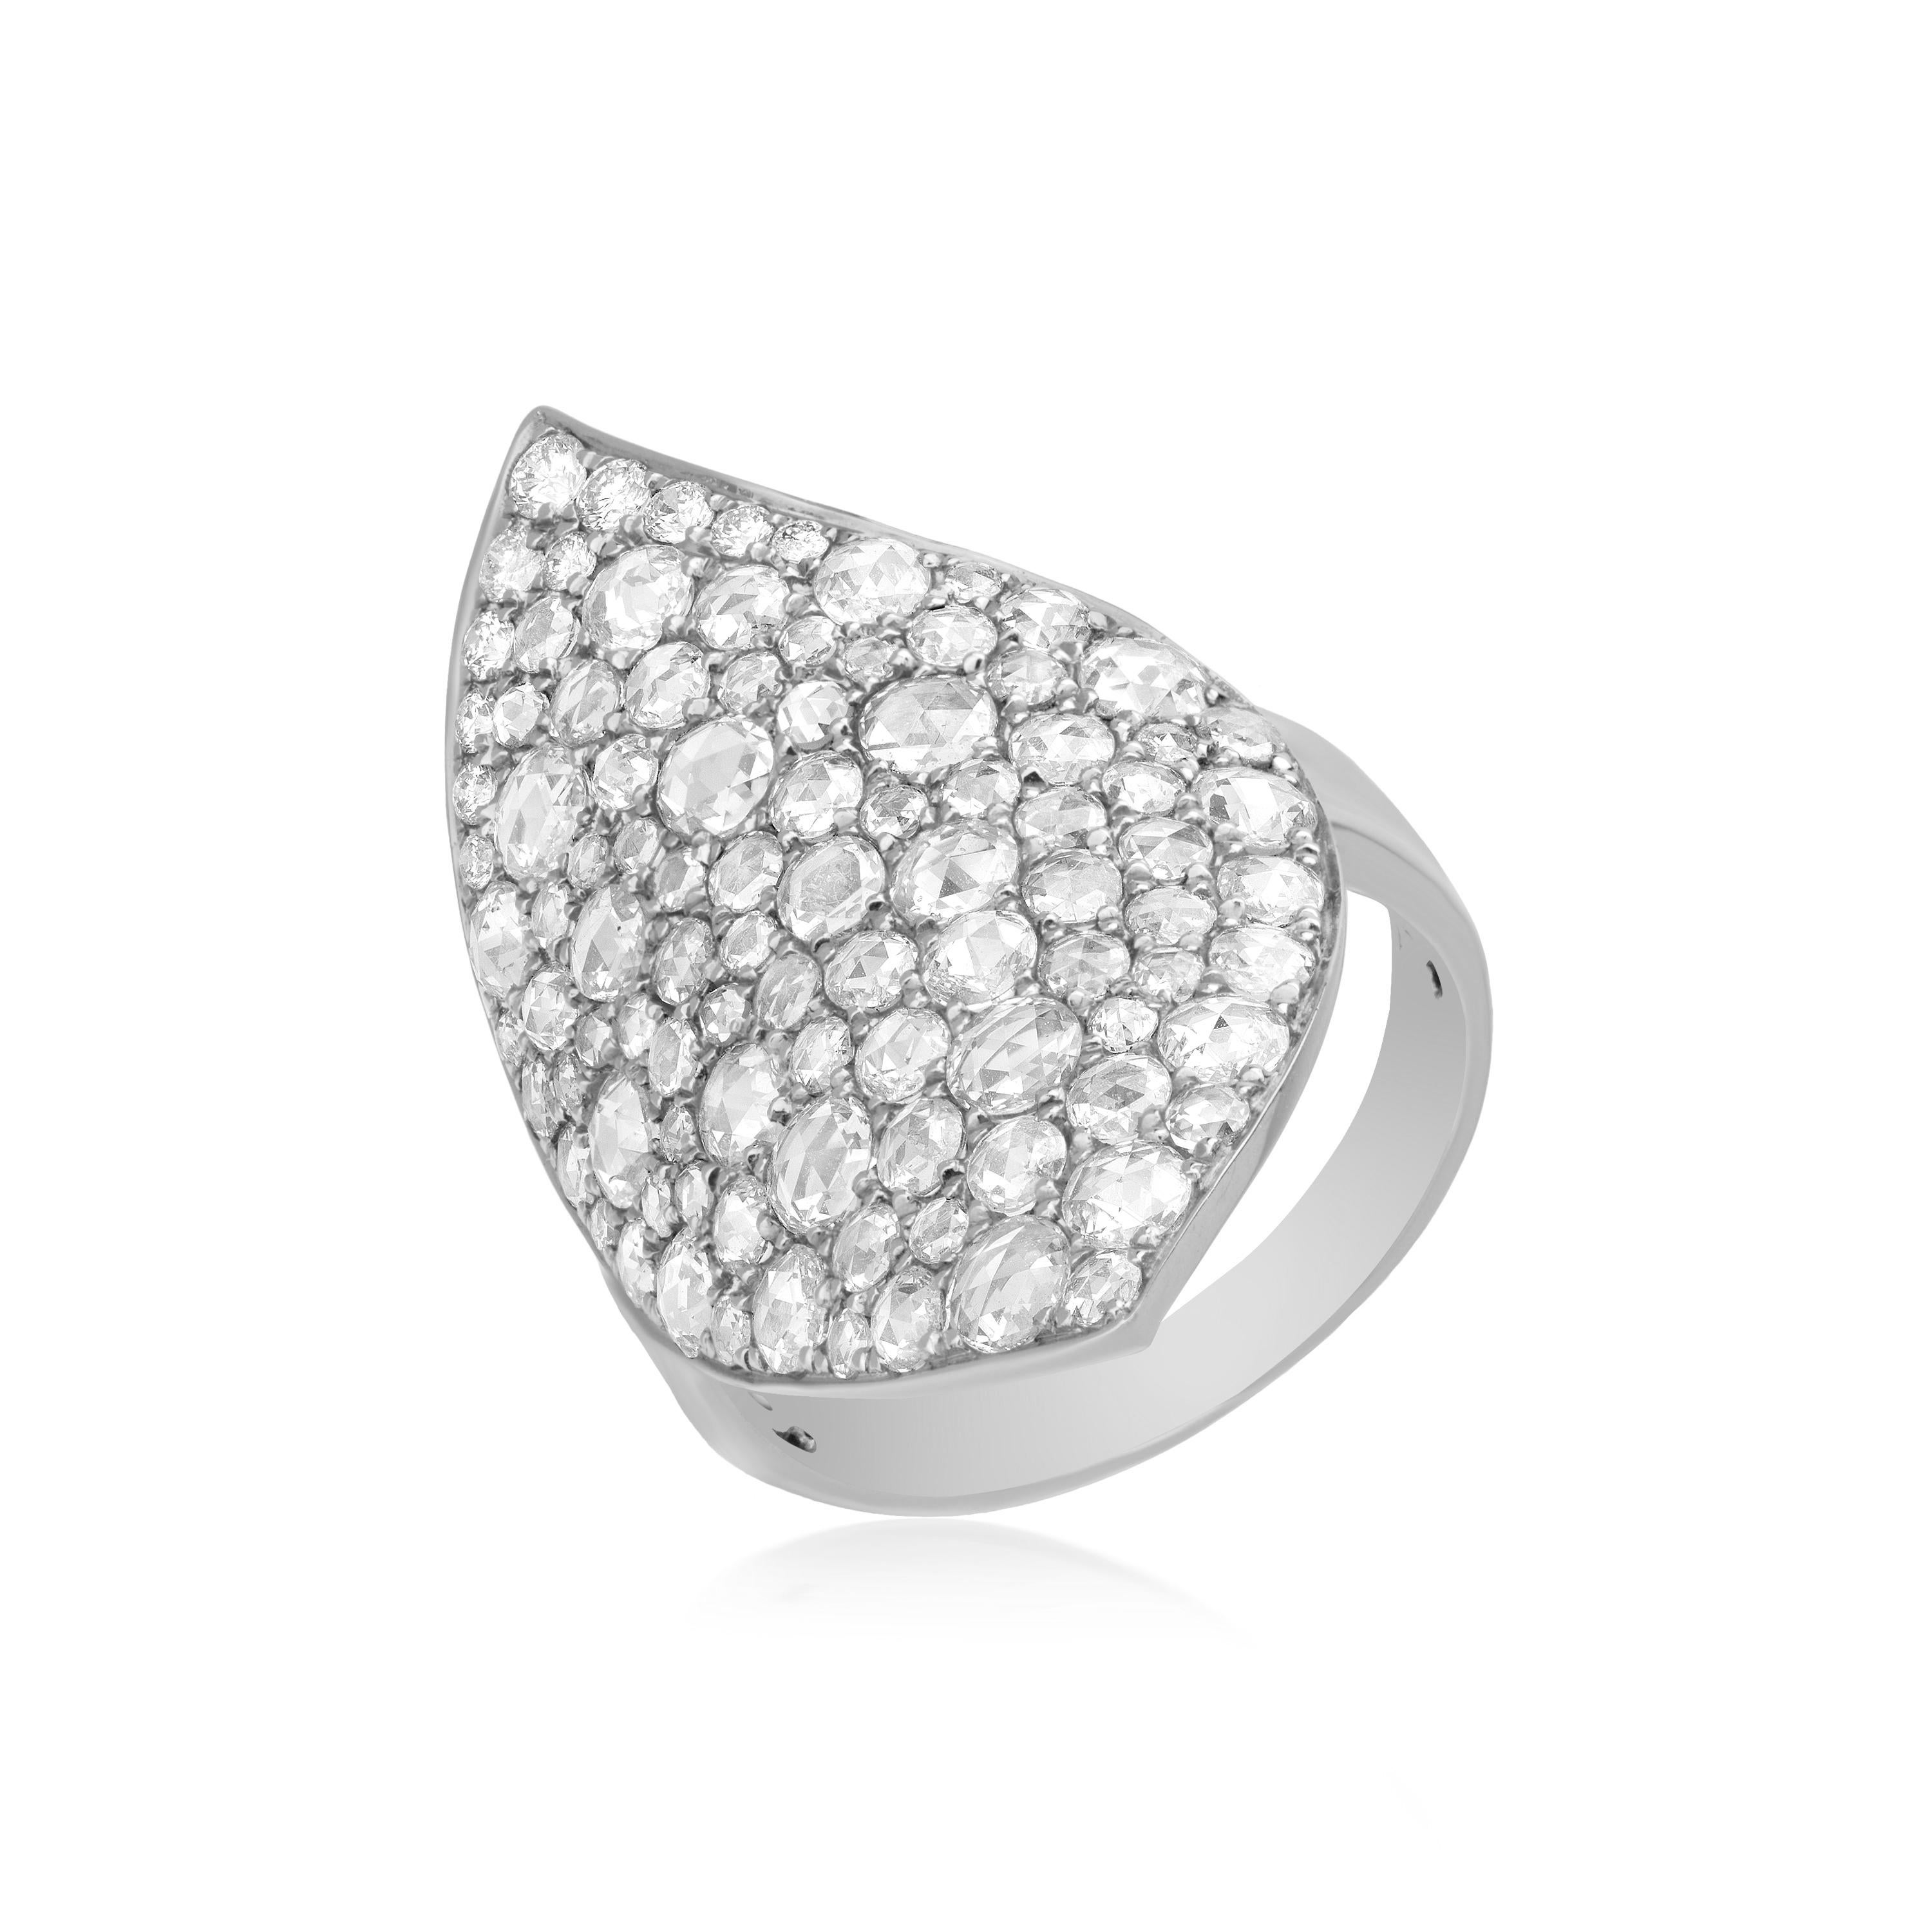 Make a stunning statement with the Luxle 2.19 Cttw. Rose-Cut Round Diamond Leaf Cluster Ring in 18K White Gold. This ring is a true masterpiece, showcasing the beauty of diamonds in a unique and eye-catching design.

The ring features a leaf shaped